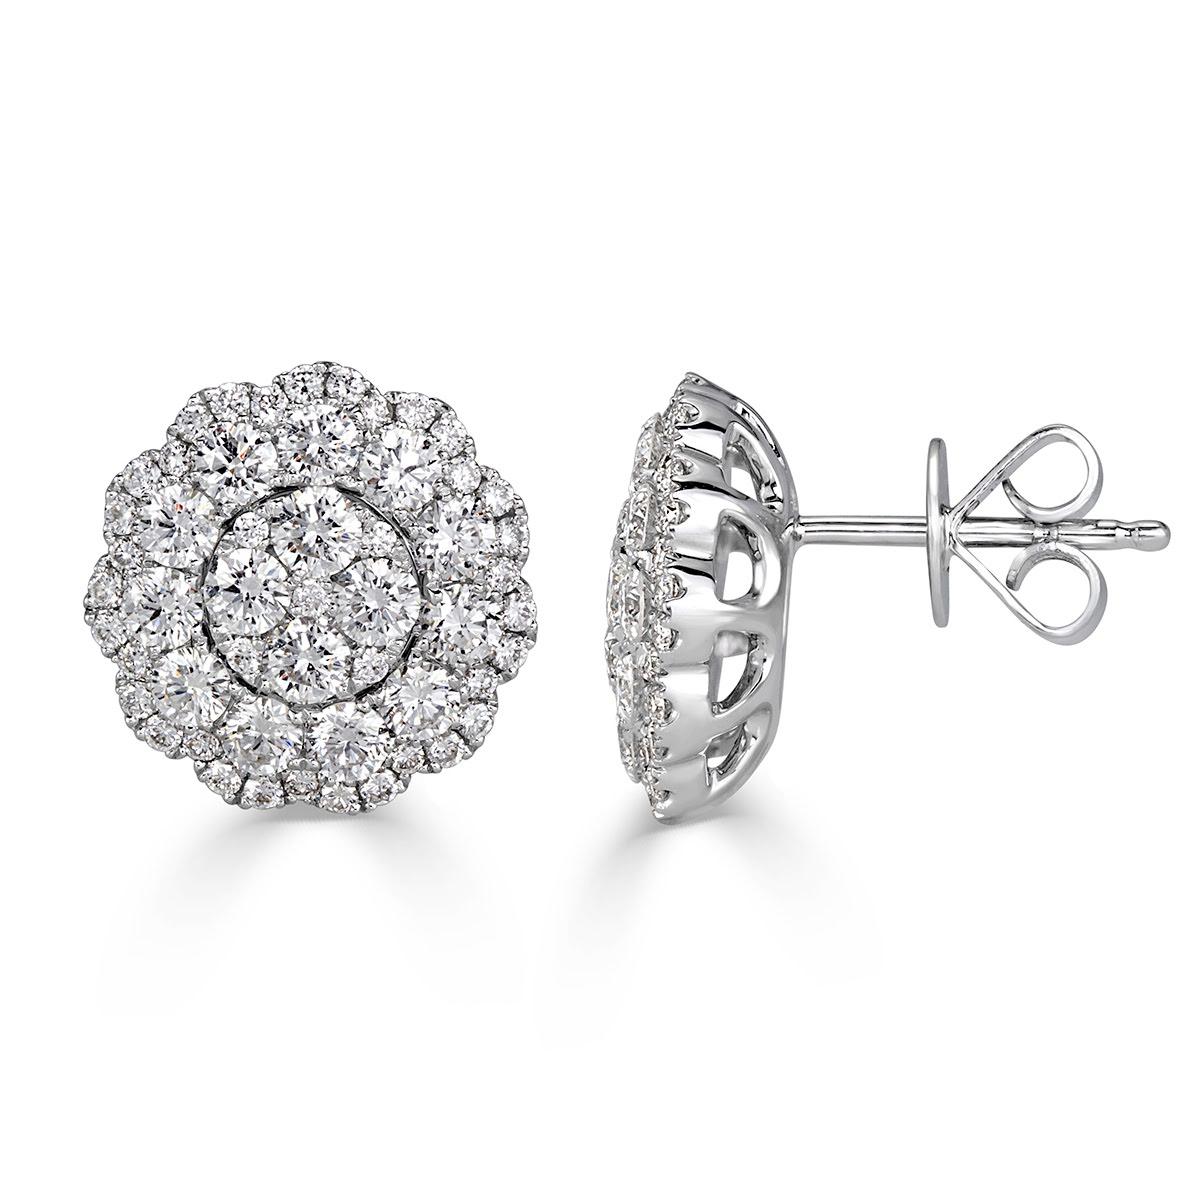 Custom created in 14k white gold, this beautiful pair of diamond stud earrings showcases 2.08ct of round brilliant cut diamond set in a whimsical floral pattern. The diamonds are graded at E-F in color, VS1-VS2 in clarity.